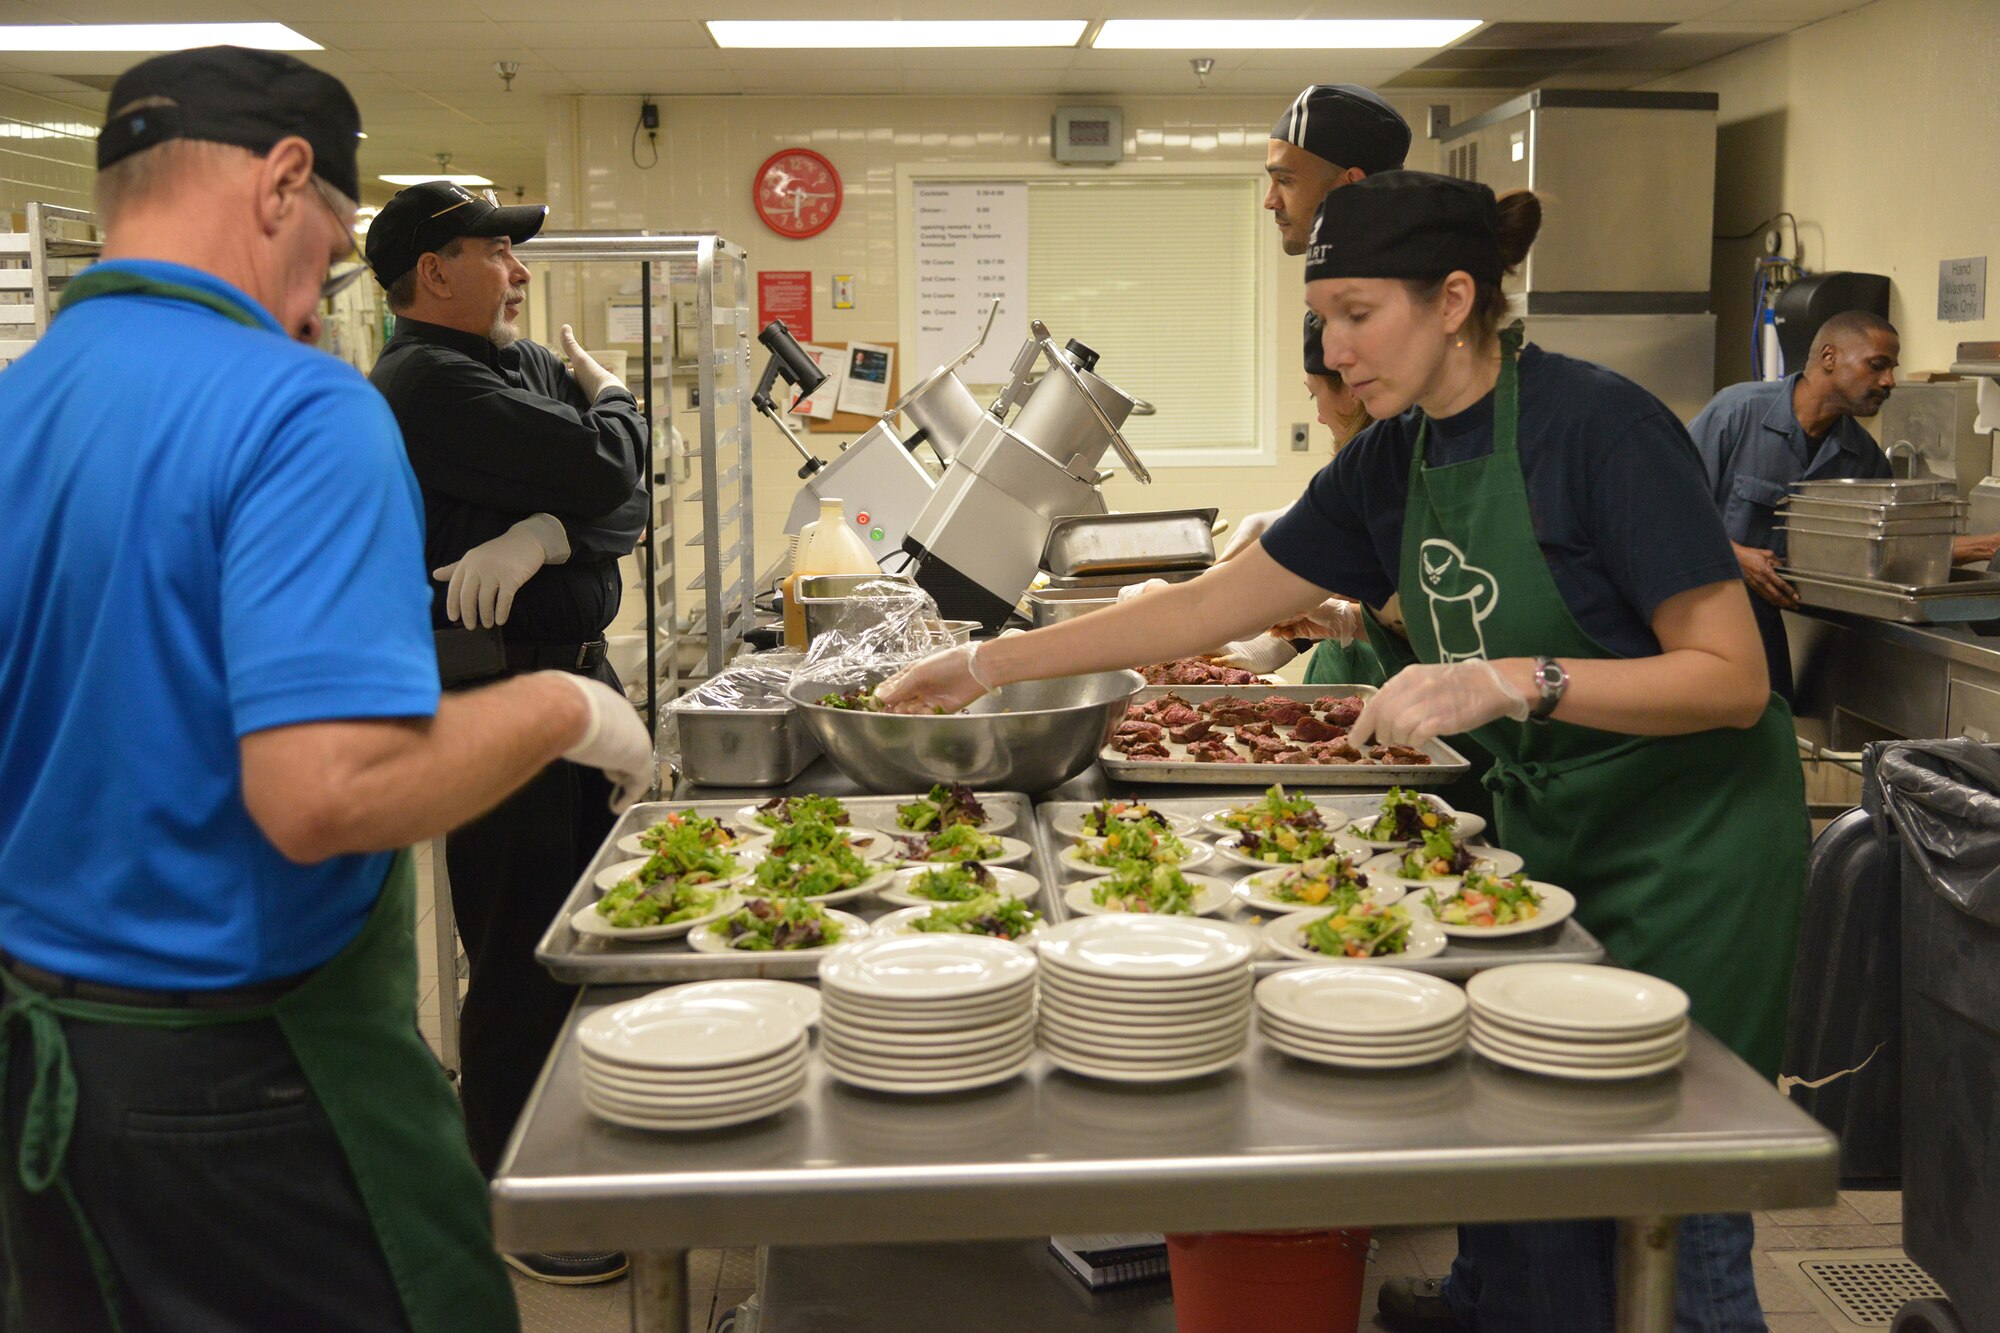 Green Team members are busy at work putting together a colorful appetizer dish. (U.S. Air Force photo by Ray Crayton) 